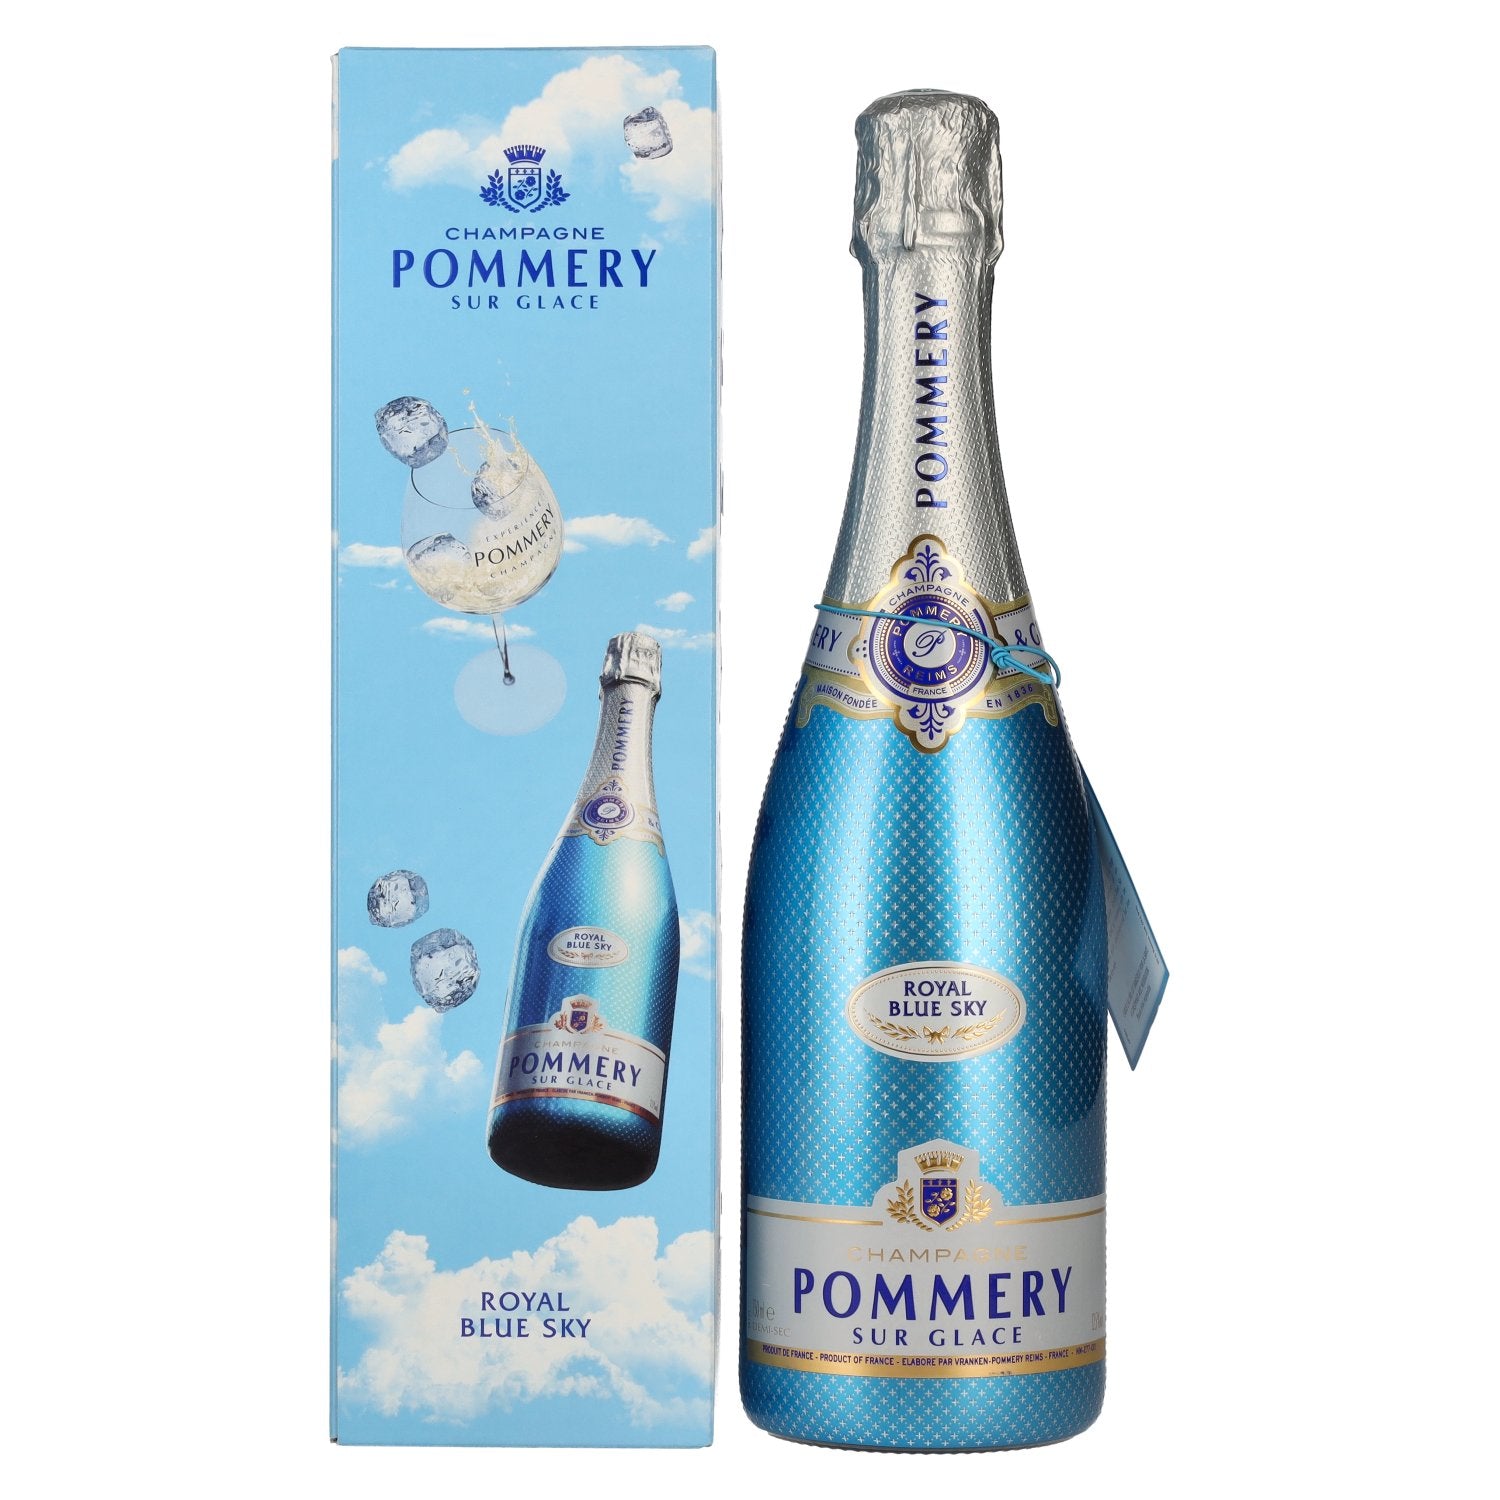 Pommery Royal Blue Sky Champagne 12,5% Vol. 0,75l in Giftbox